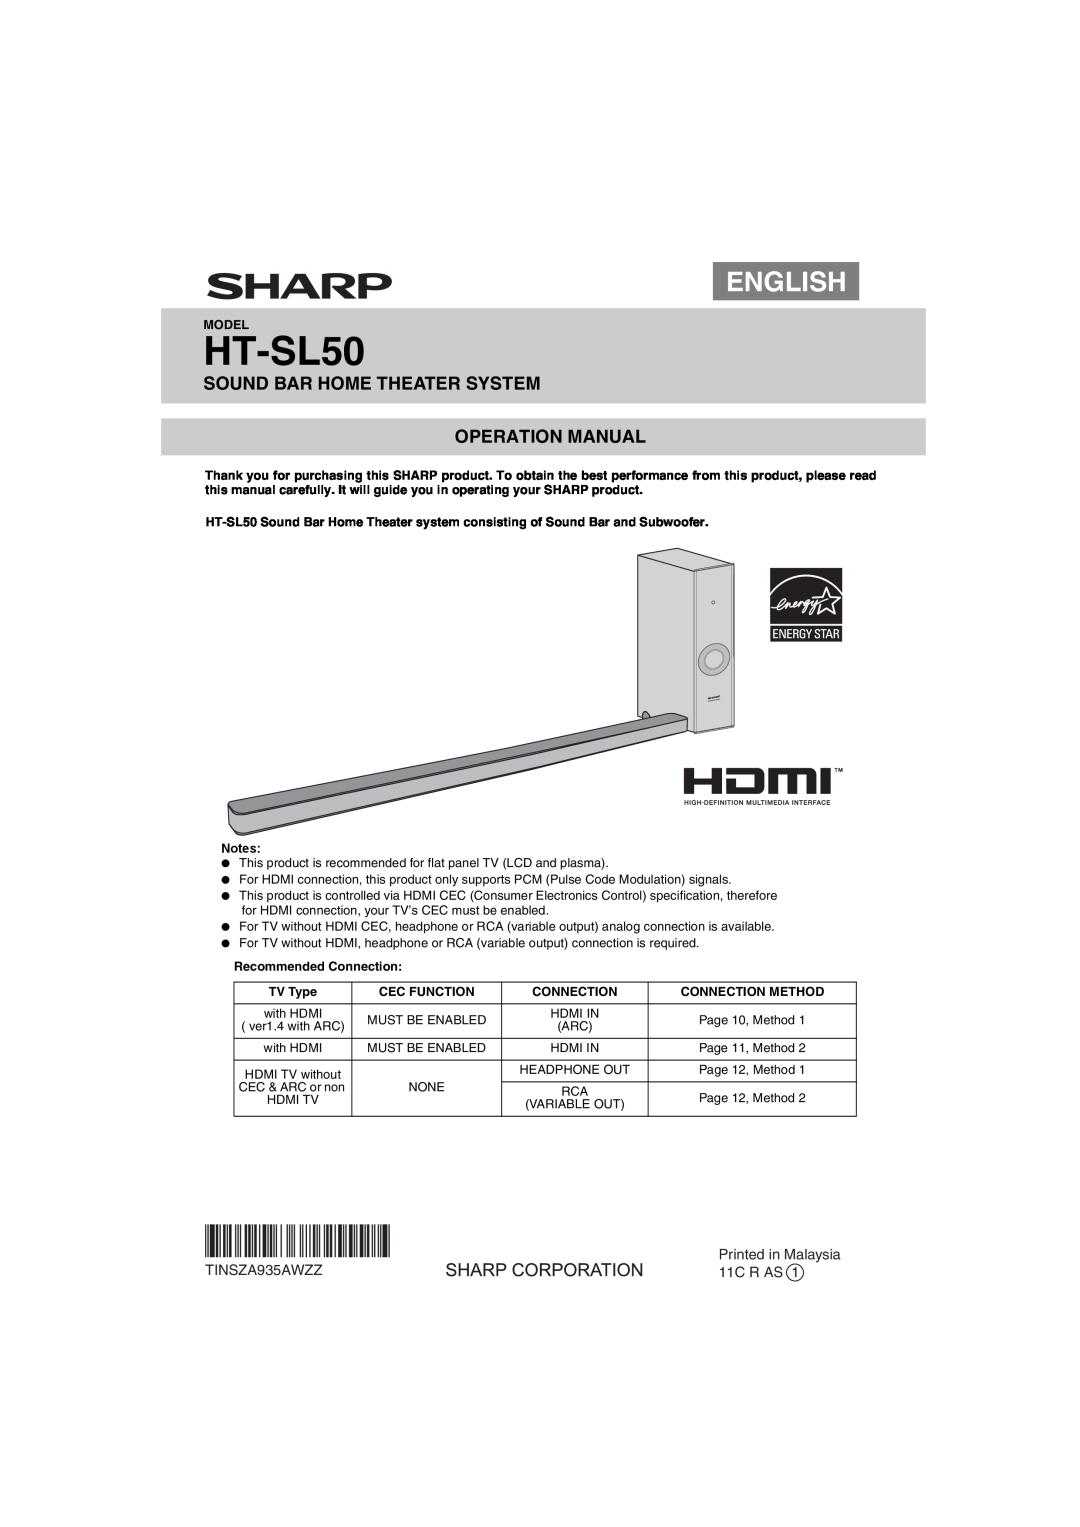 Sharp HT-SL50 operation manual TINSZA935AWZZ, Model, Recommended Connection, TV Type, Cec Function, Connection Method 